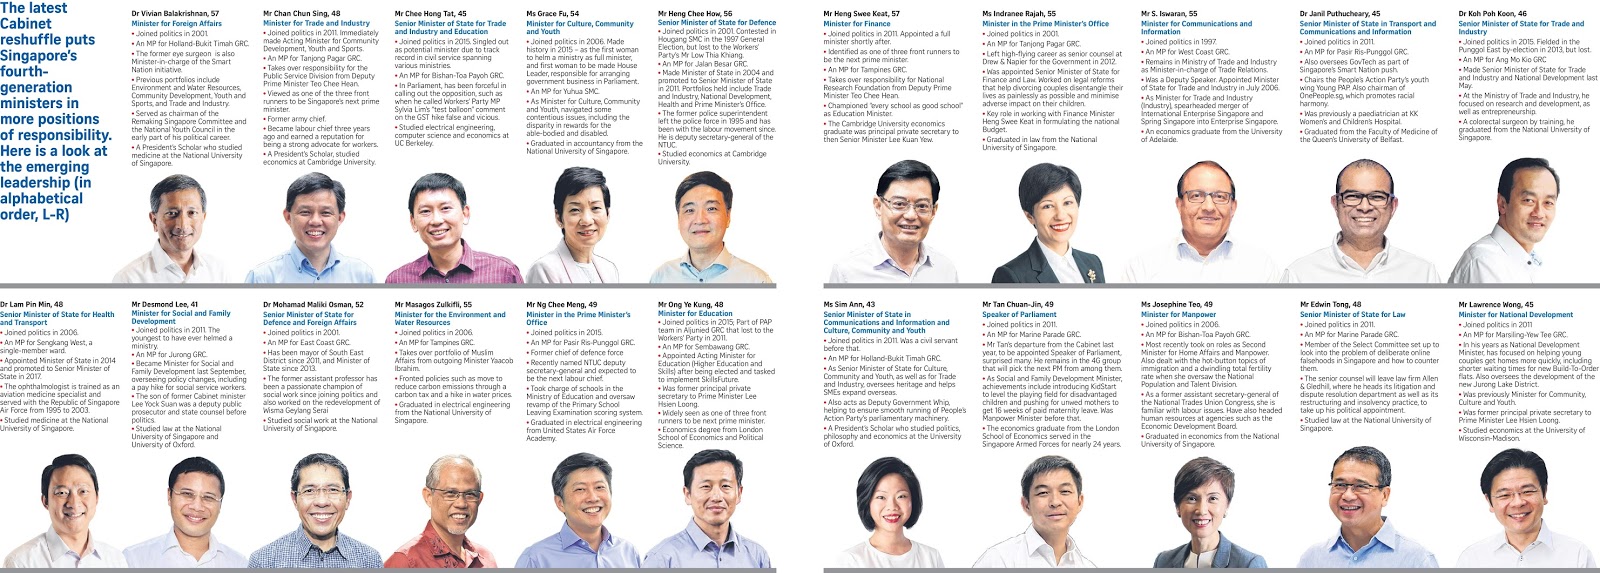 Singapore Cabinet reshuffle April 2018: Fourth-generation leaders to helm 10 of 16 ministries